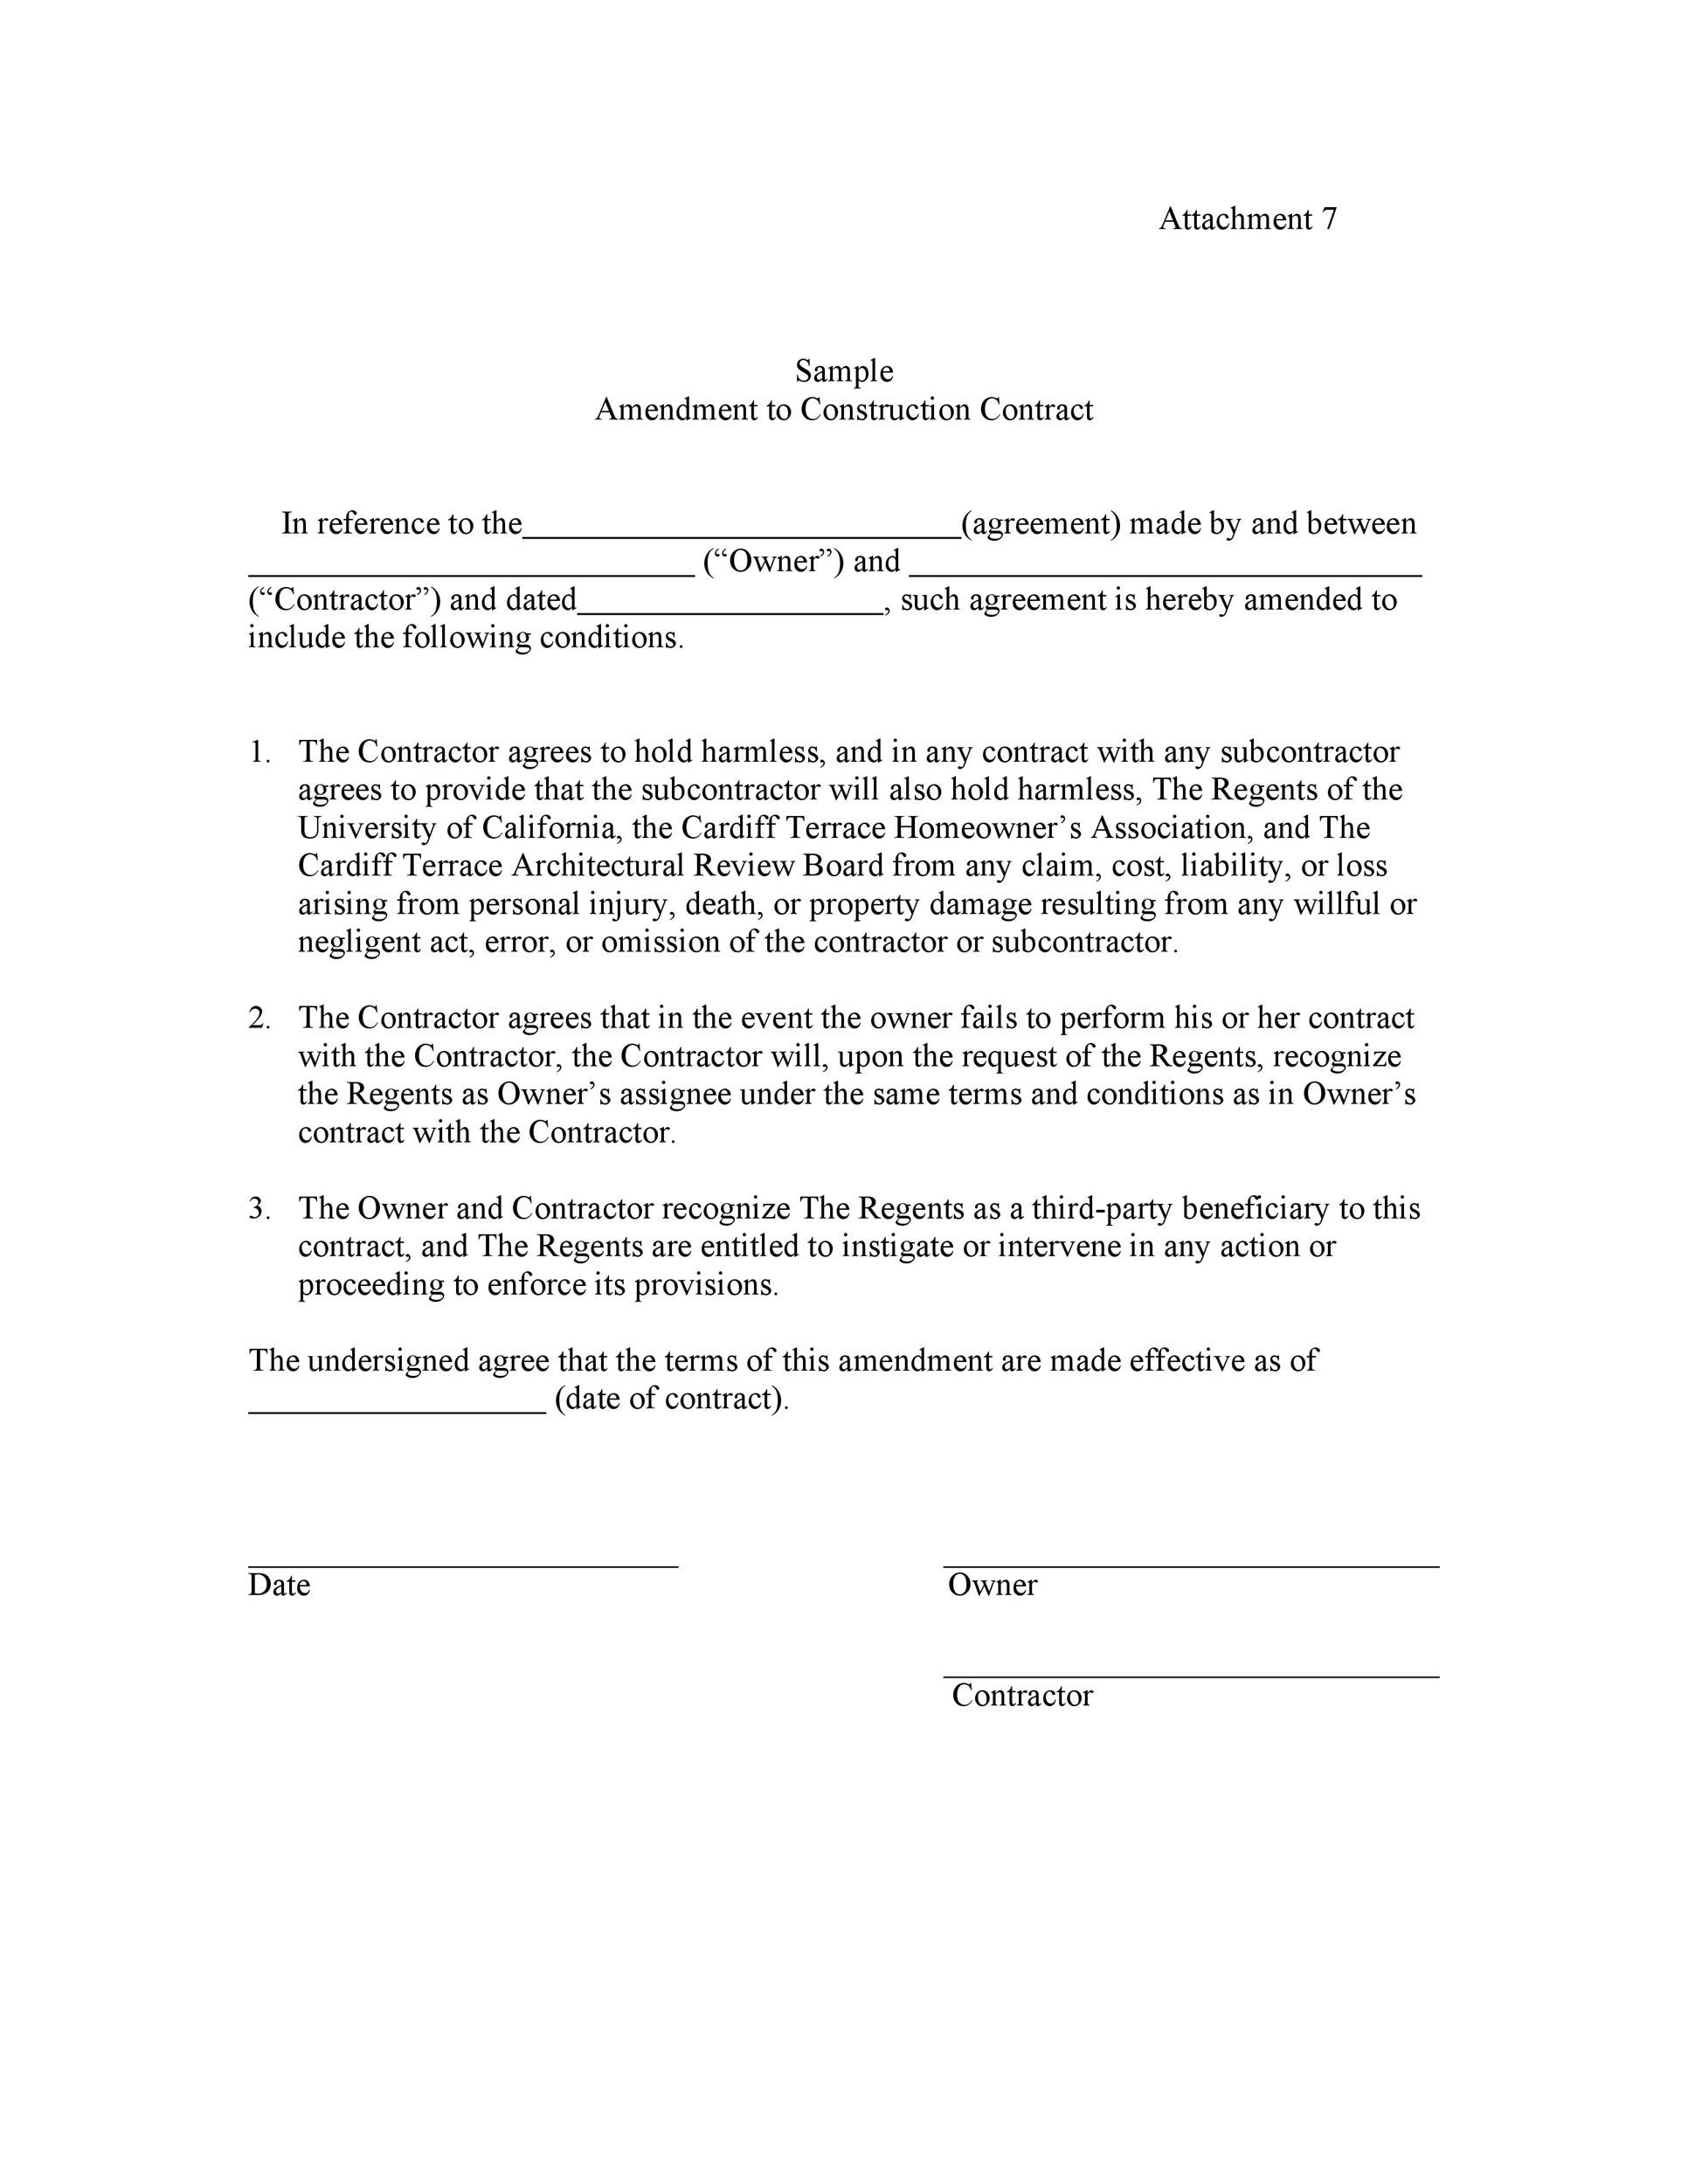 Contract Amendment Template from templatelab.com